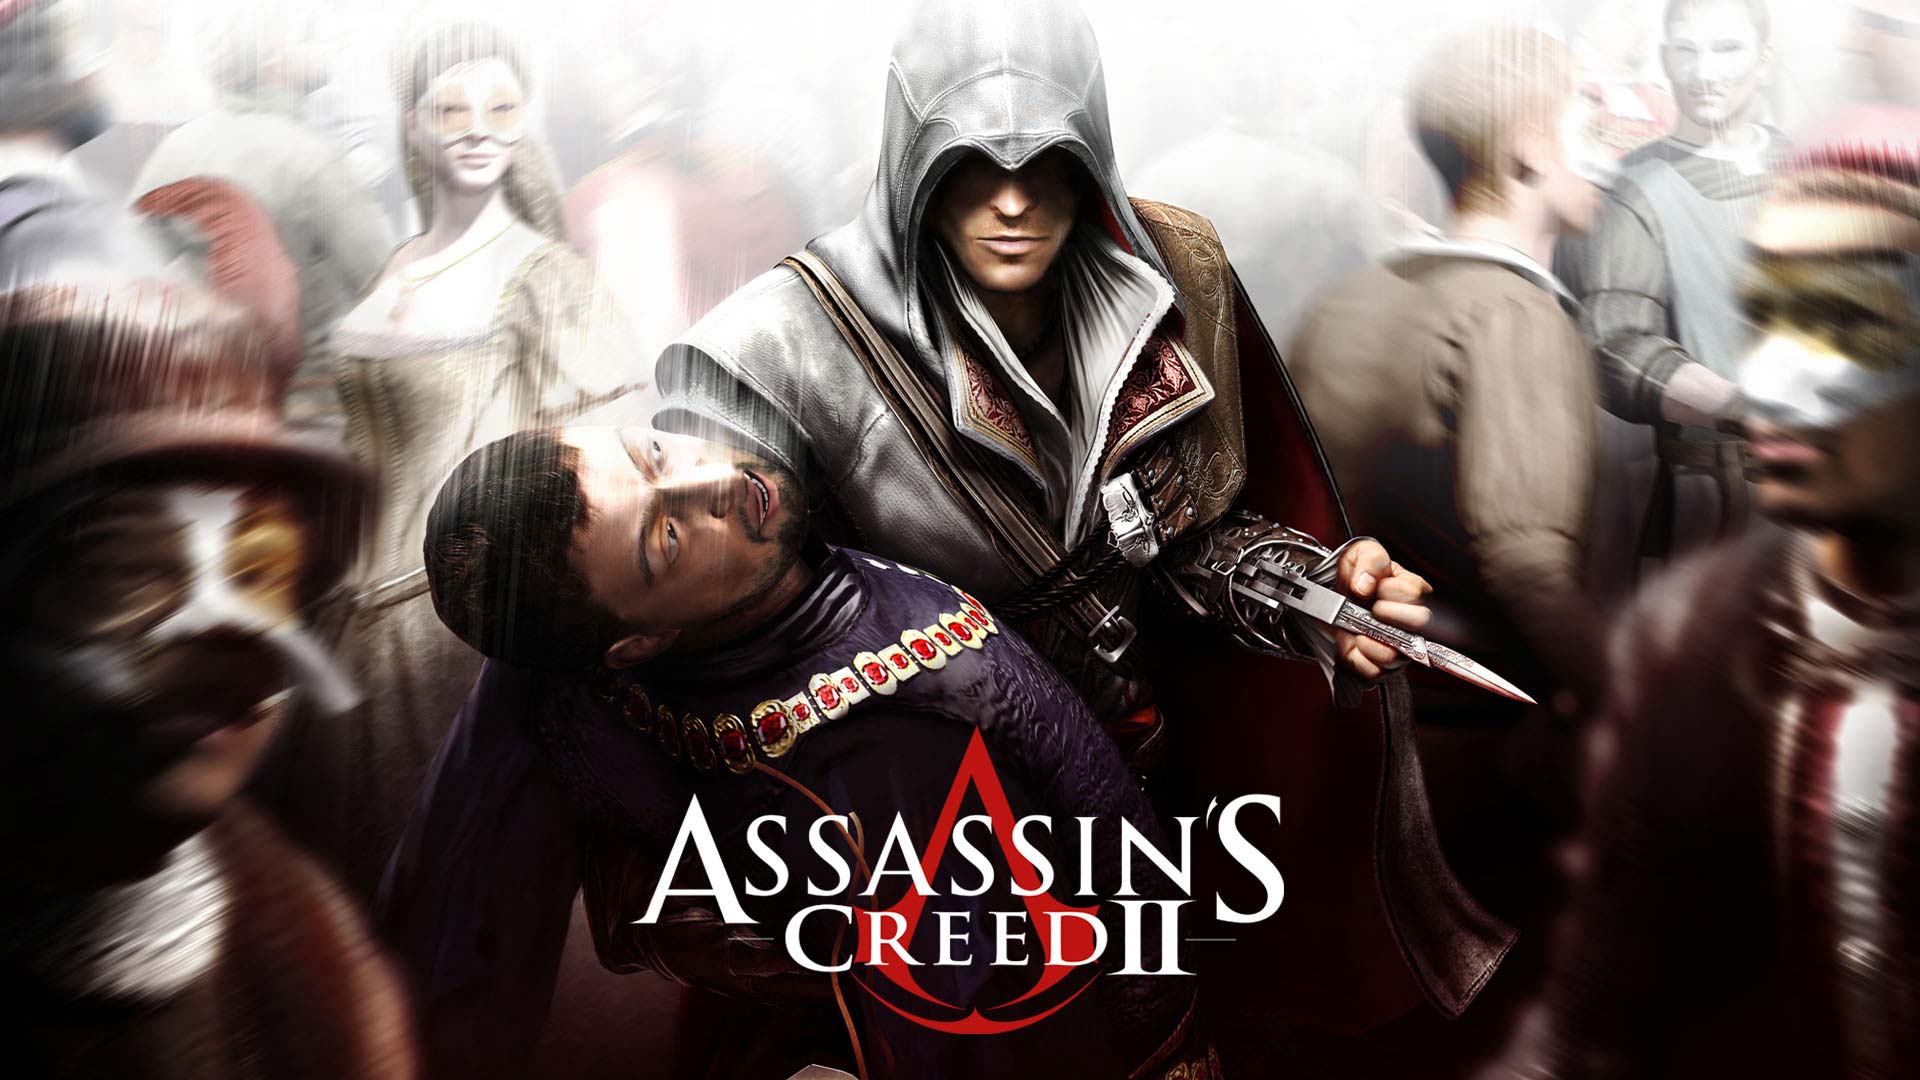 HQ Assassin's Creed II Wallpapers | File 183.81Kb